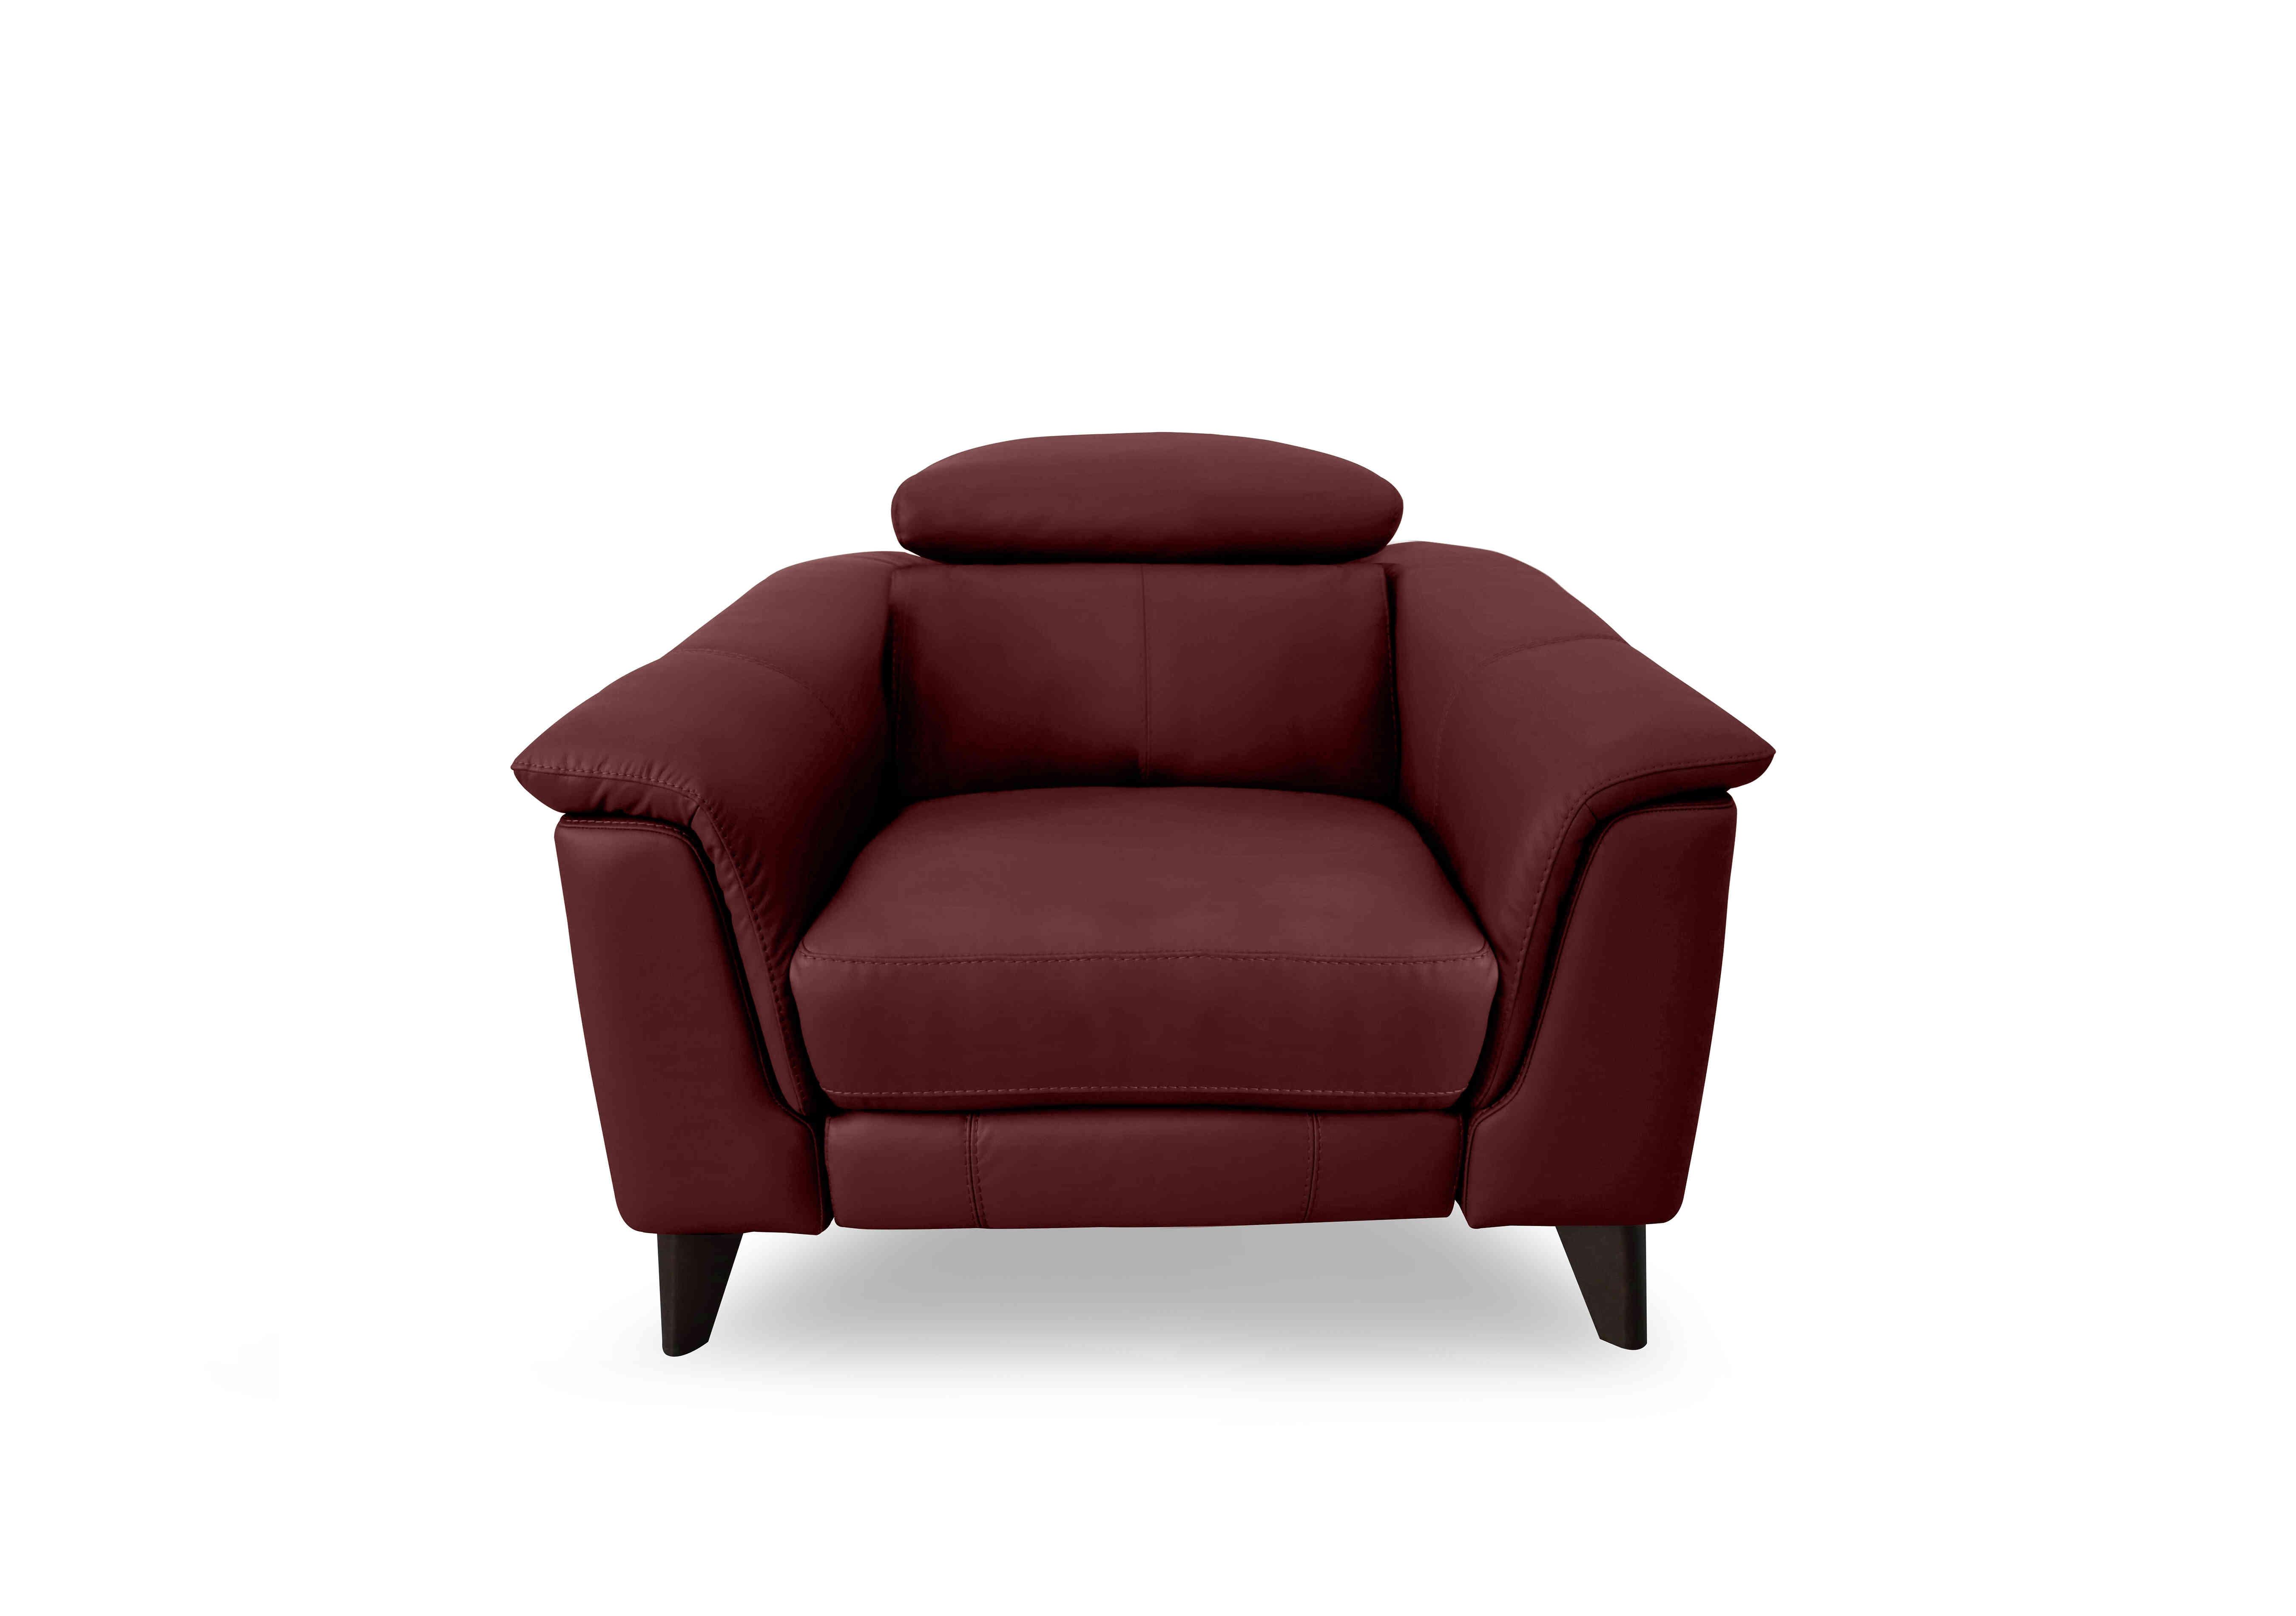 Wade Leather Chair in Bv-035c Deep Red on Furniture Village